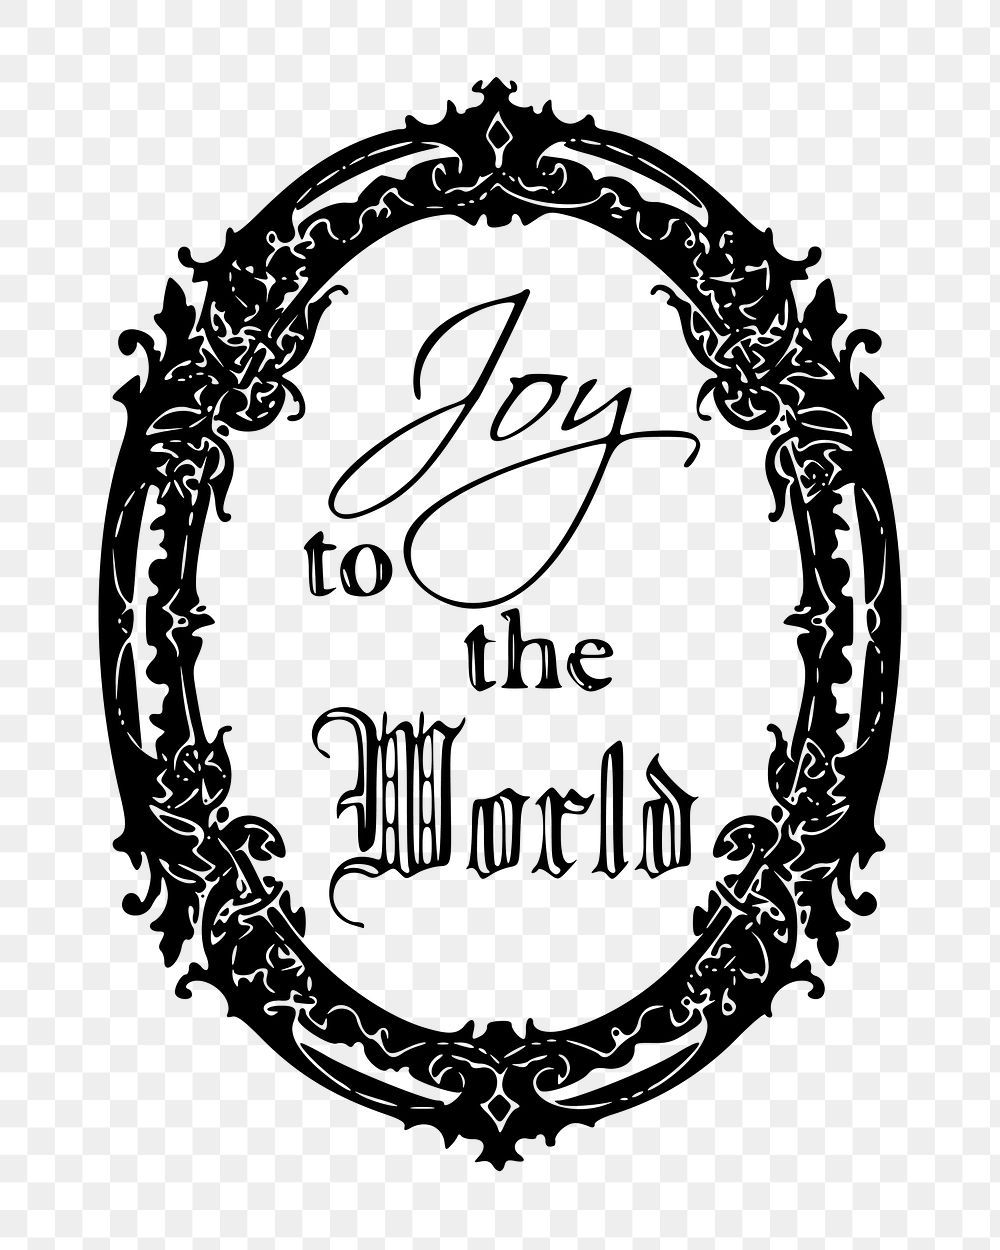 Png joy to the world clipart, message badge, transparent background. Free public domain CC0 image.